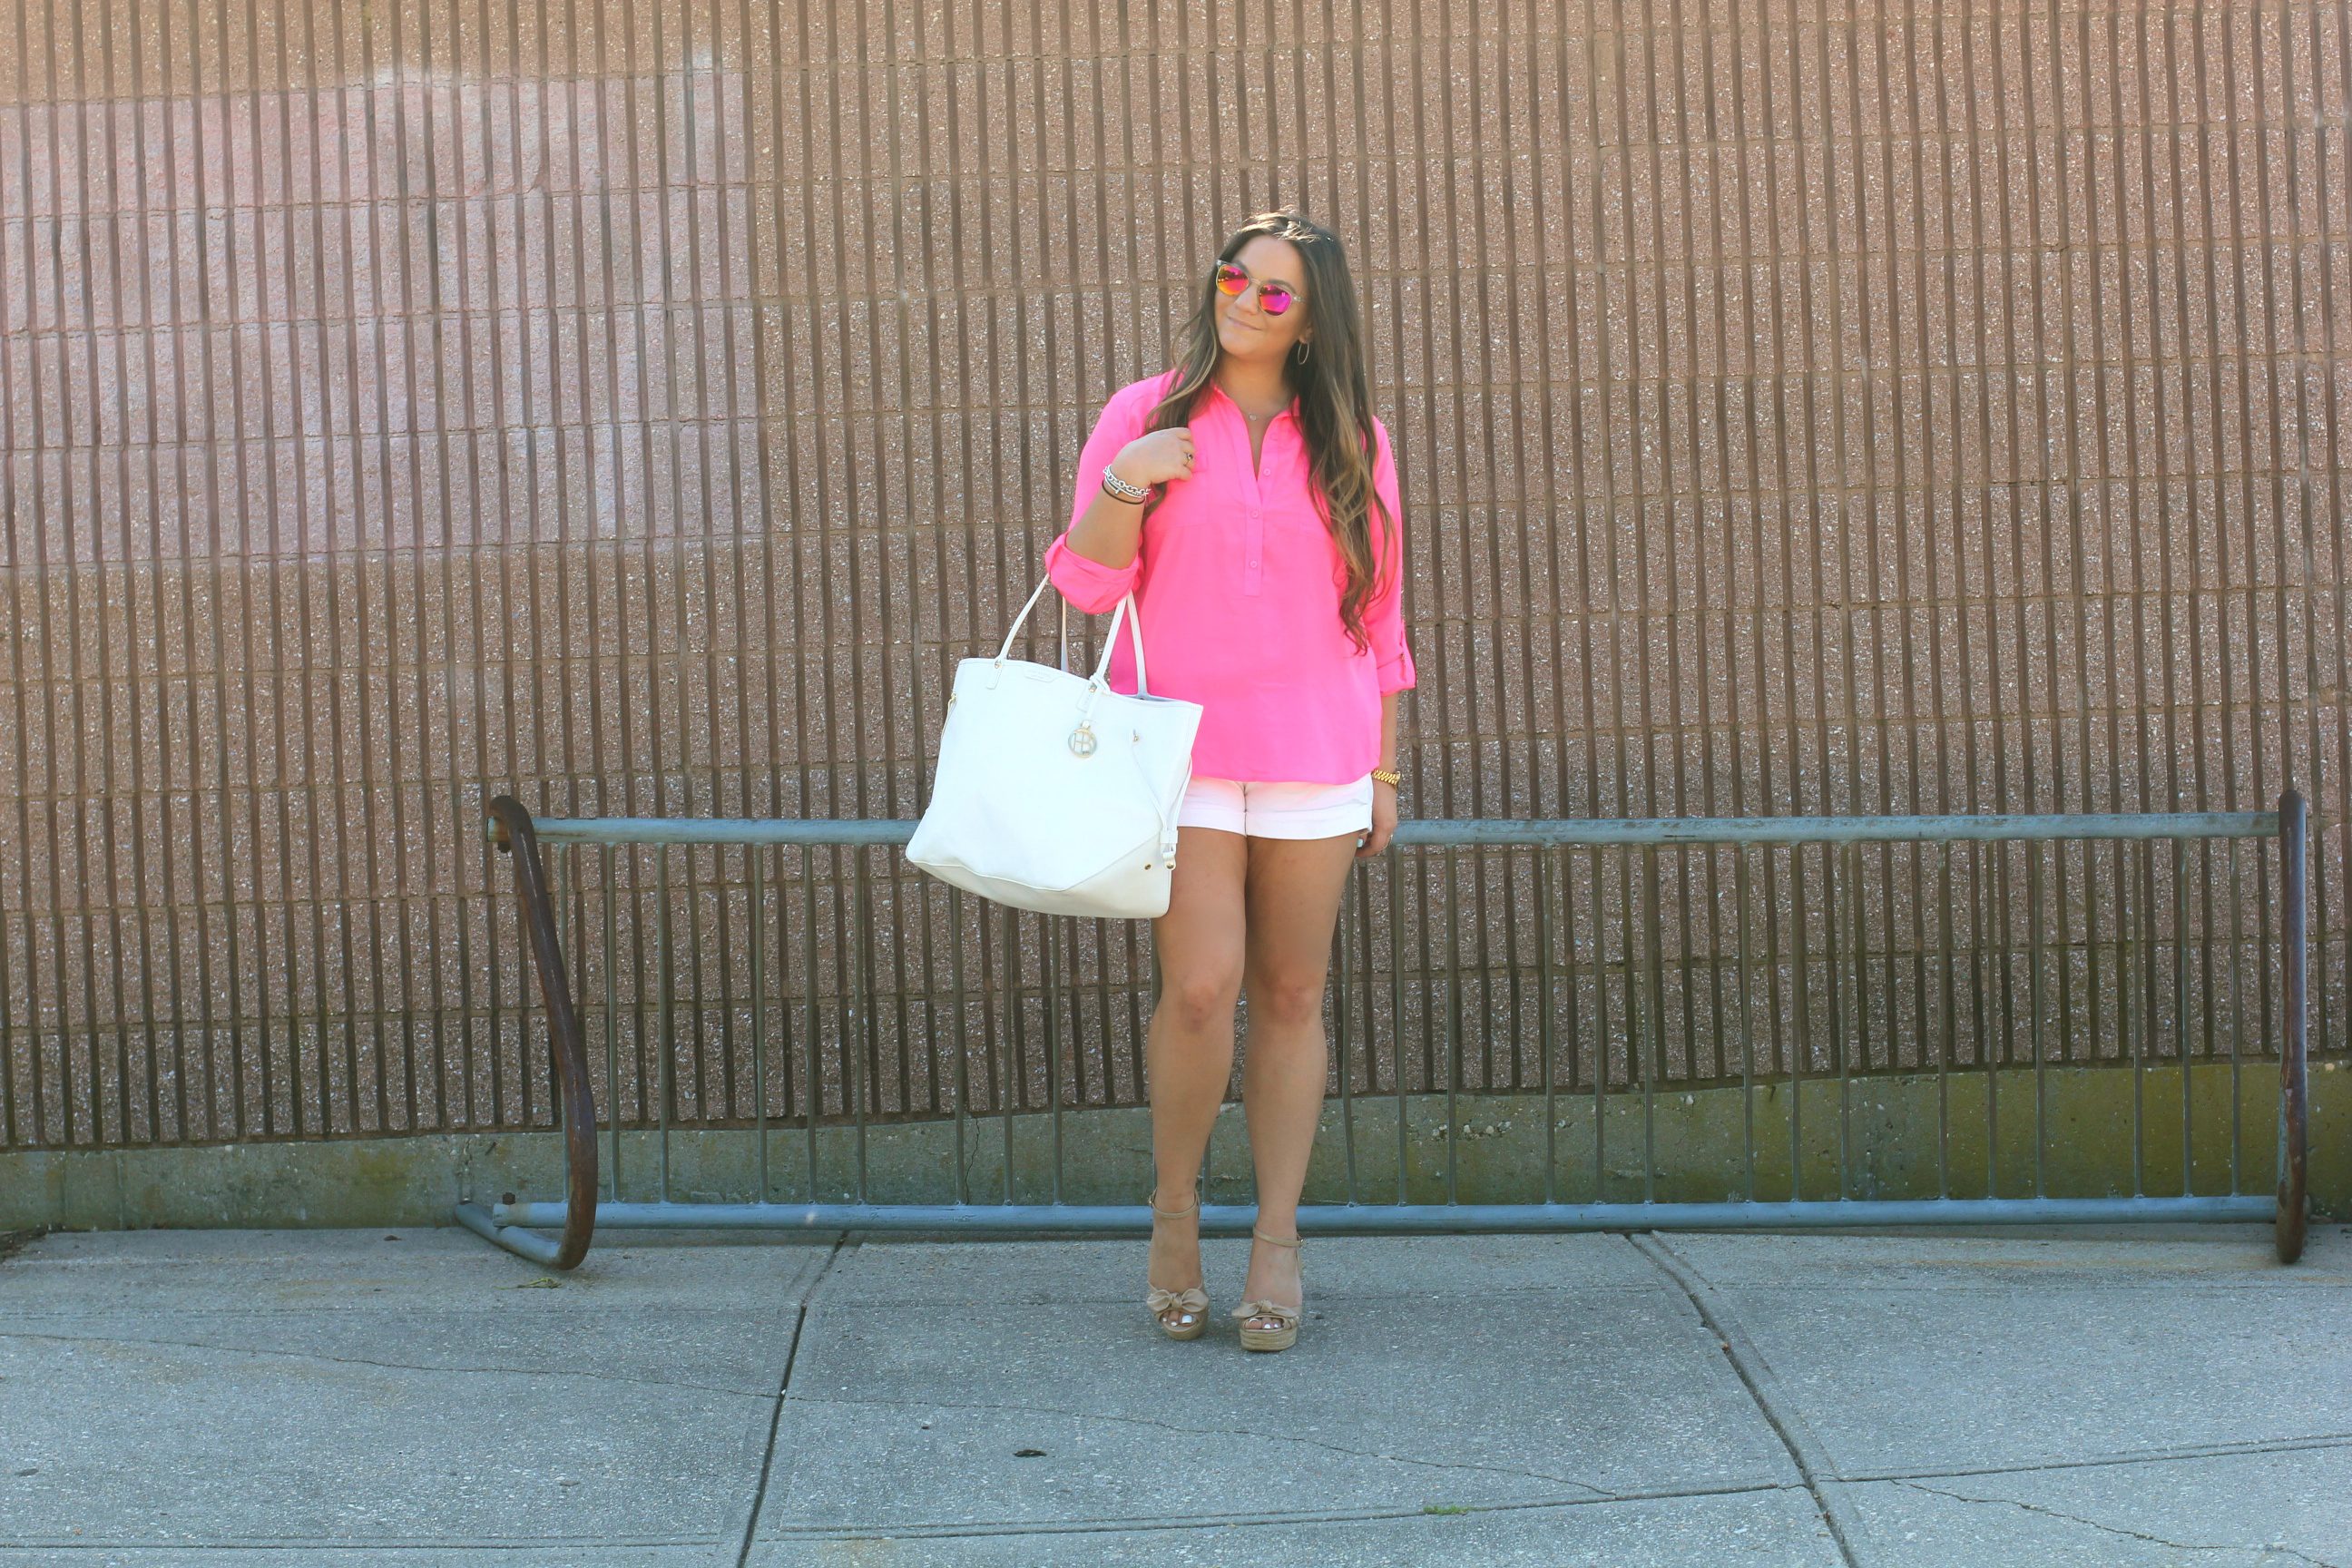 espadrille wedges, missyonmadison, melissa tierney, nude espadrille wedges, long island, long island beaches, hot pink button down blouse, pink blouse, poshmakr, white henri bendel tote, white leather tote, clear mirrored sunglasses, mirrored sunglasses, white cotton shorts, fashion blogger, summer style, outfit inspiration, how to wear neon,